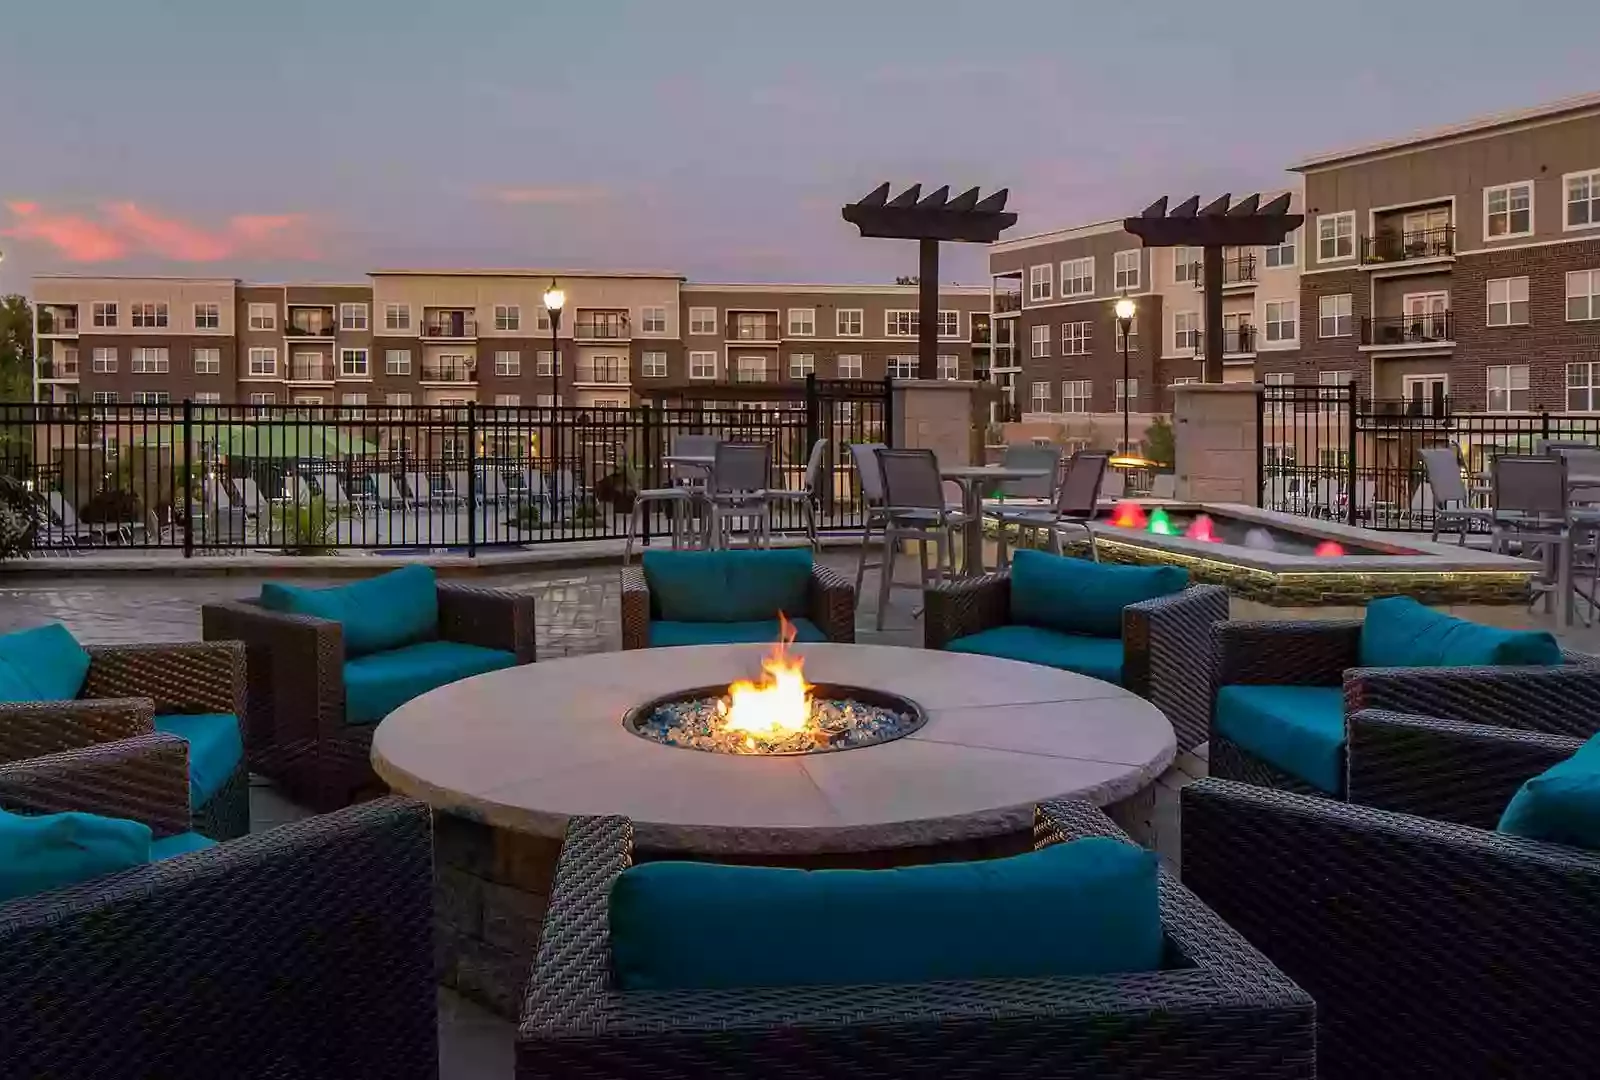 Outdoor fire pit with lounge chairs on terrace at Savoy of West Chester.